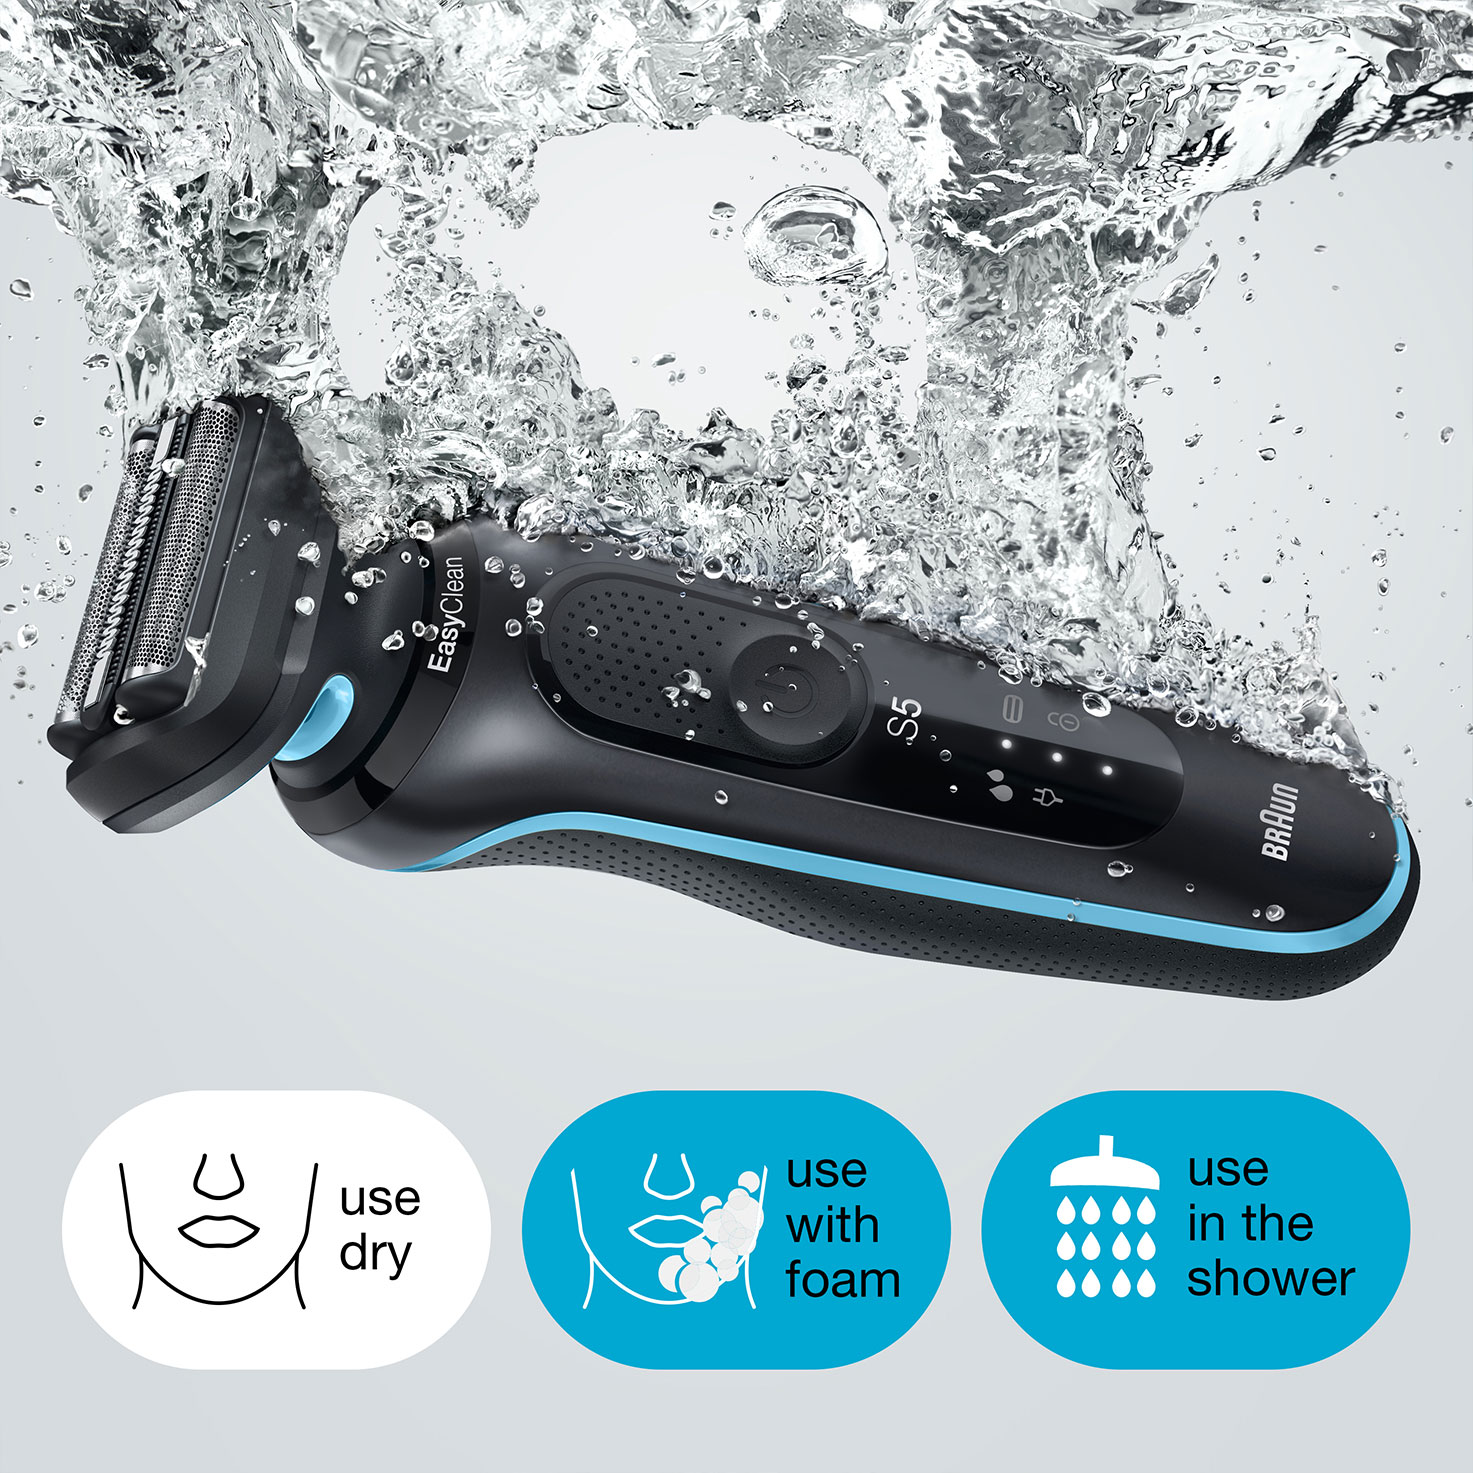 Series 5 51-M1850s Wet & Dry shaver with 2 attachments, mint.